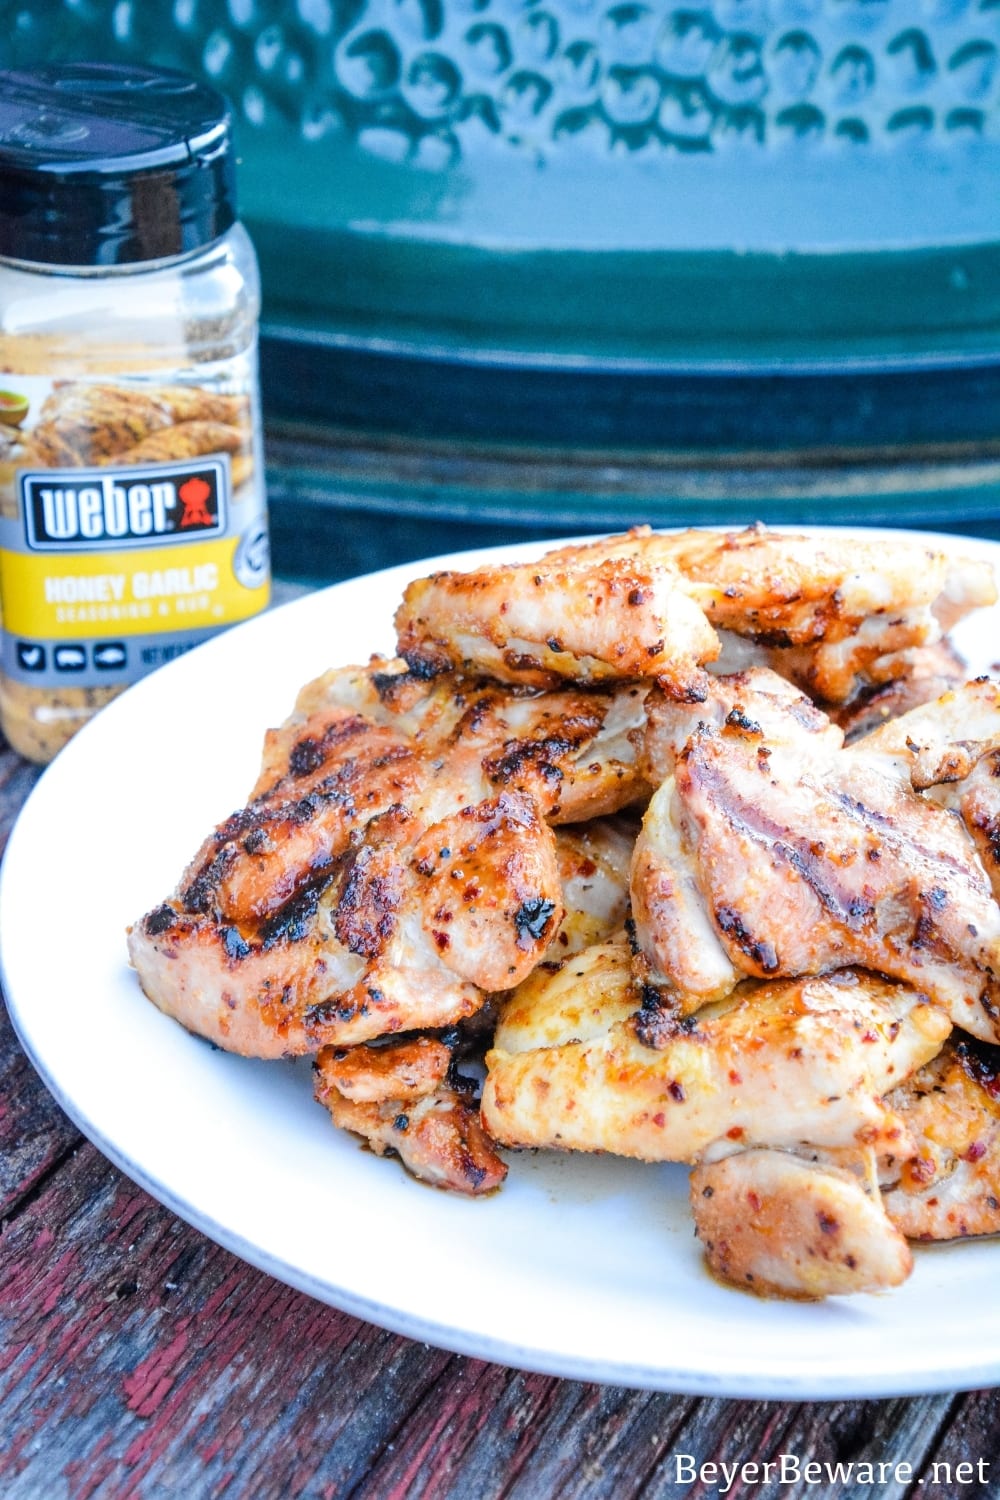 Grilled chicken no longer has to be dry and tough with this simple method for how to make the best grilled chicken recipe with boneless, skinless chicken thighs and honey garlic seasoning.